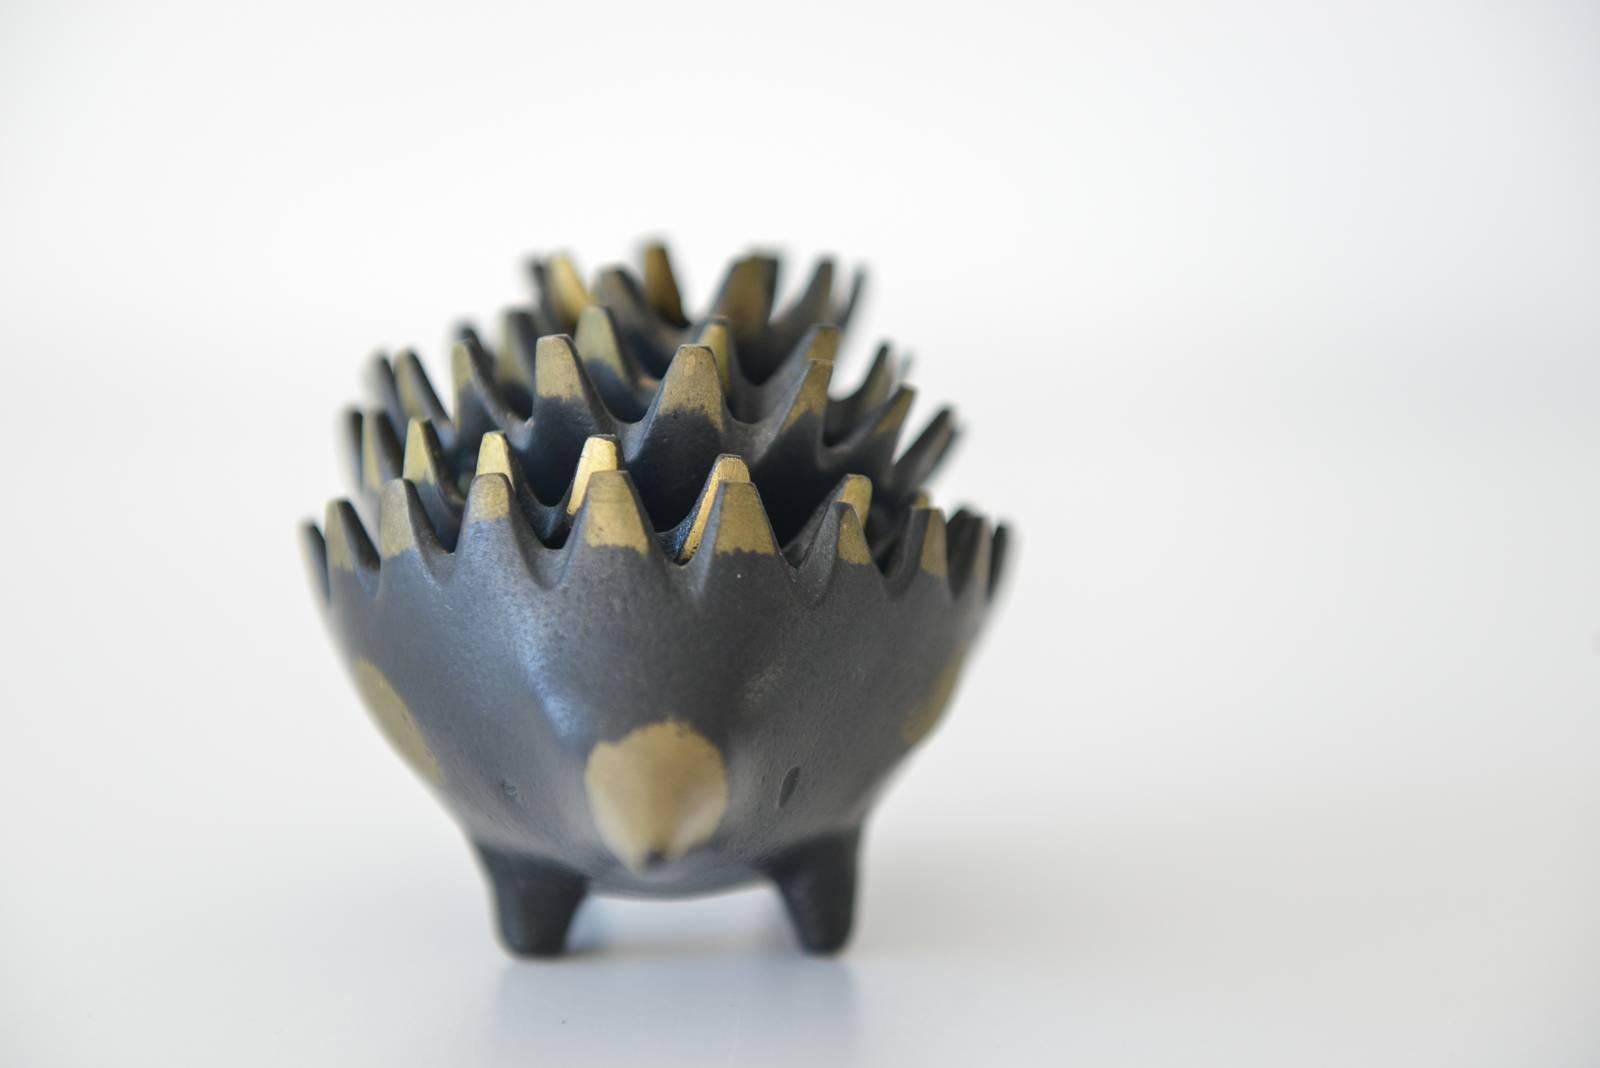 Walter Bosse for Hertha Baller Stackable Hedgehog Ashtray, circa 1955.

A complete set of six stackable hedgehog ashtrays. Design by Walter Bosse, mfg by Hertha Baller Austria in the 1950s. Made of brass, in excellent vintage